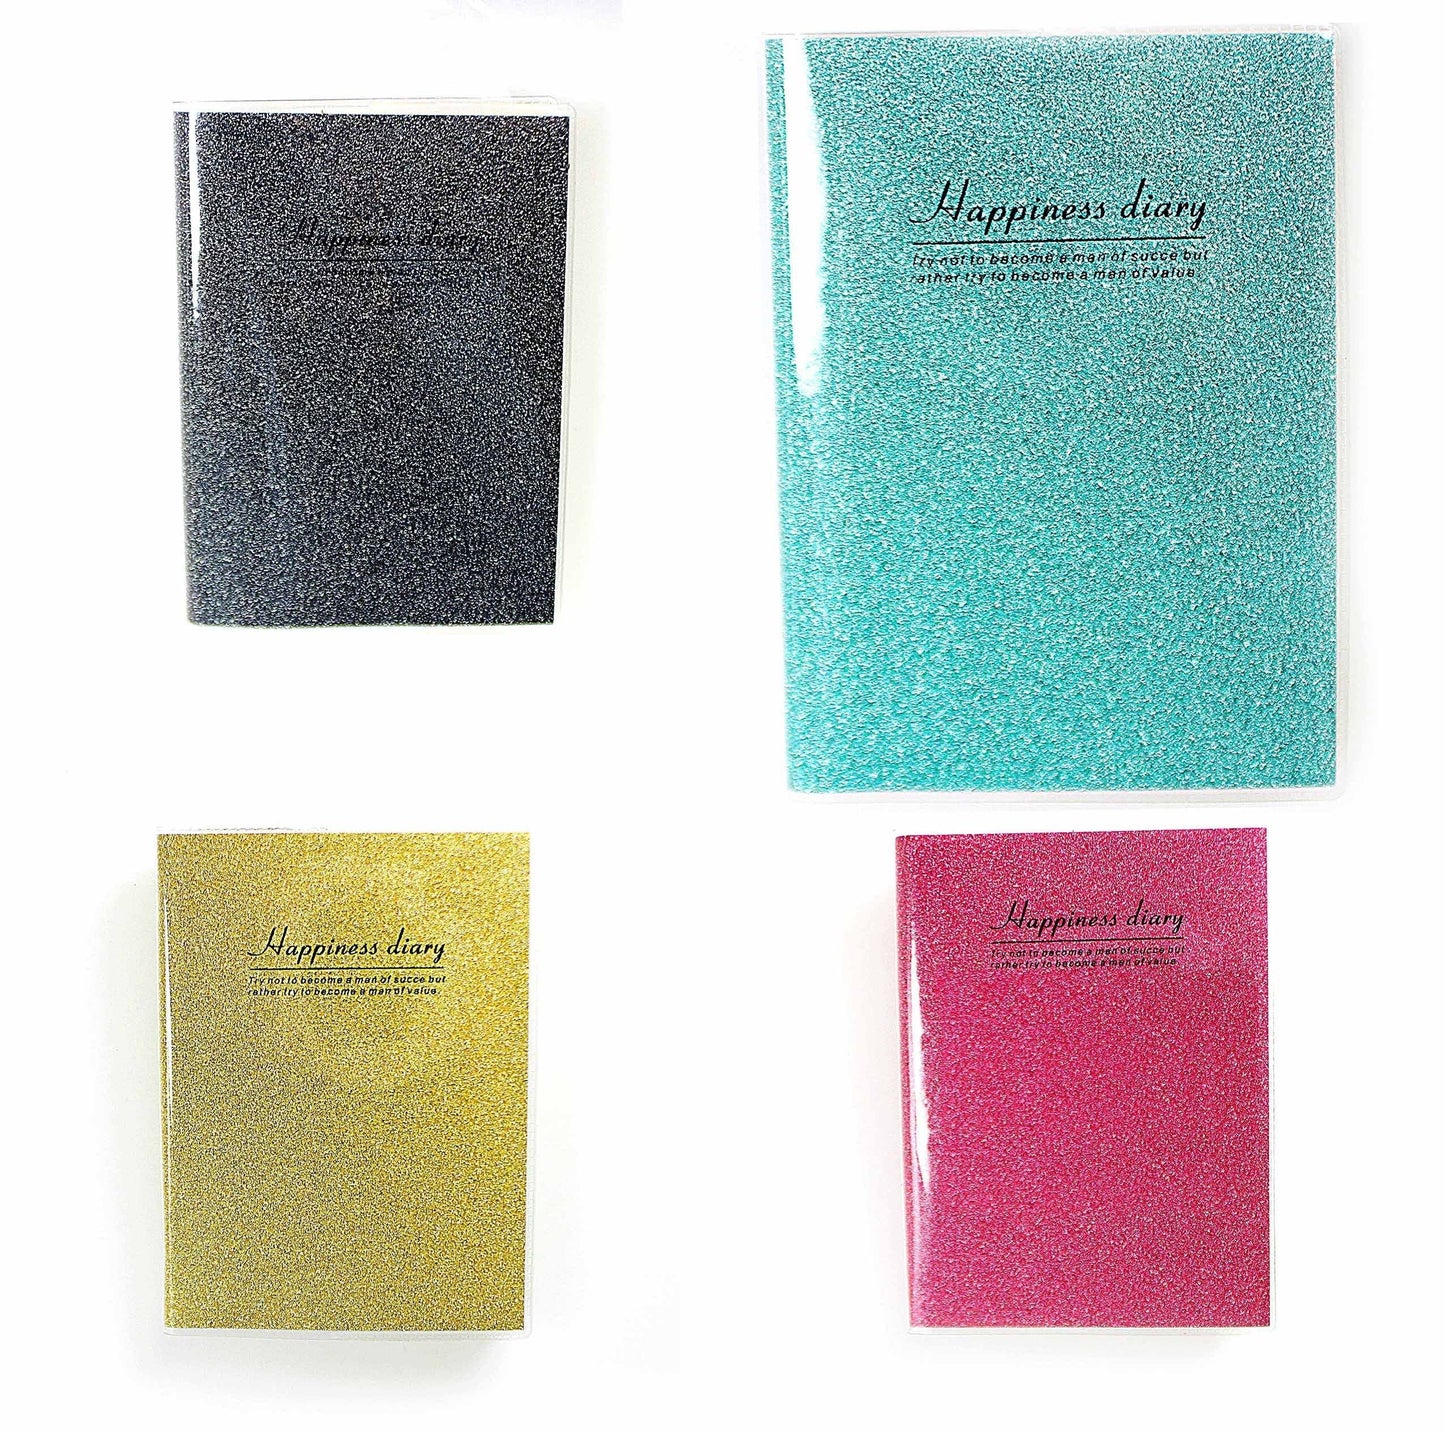 Happiness Diary Notebook 24 x 17.5 cm Assorted Colours 4659 (Large Letter Rate)